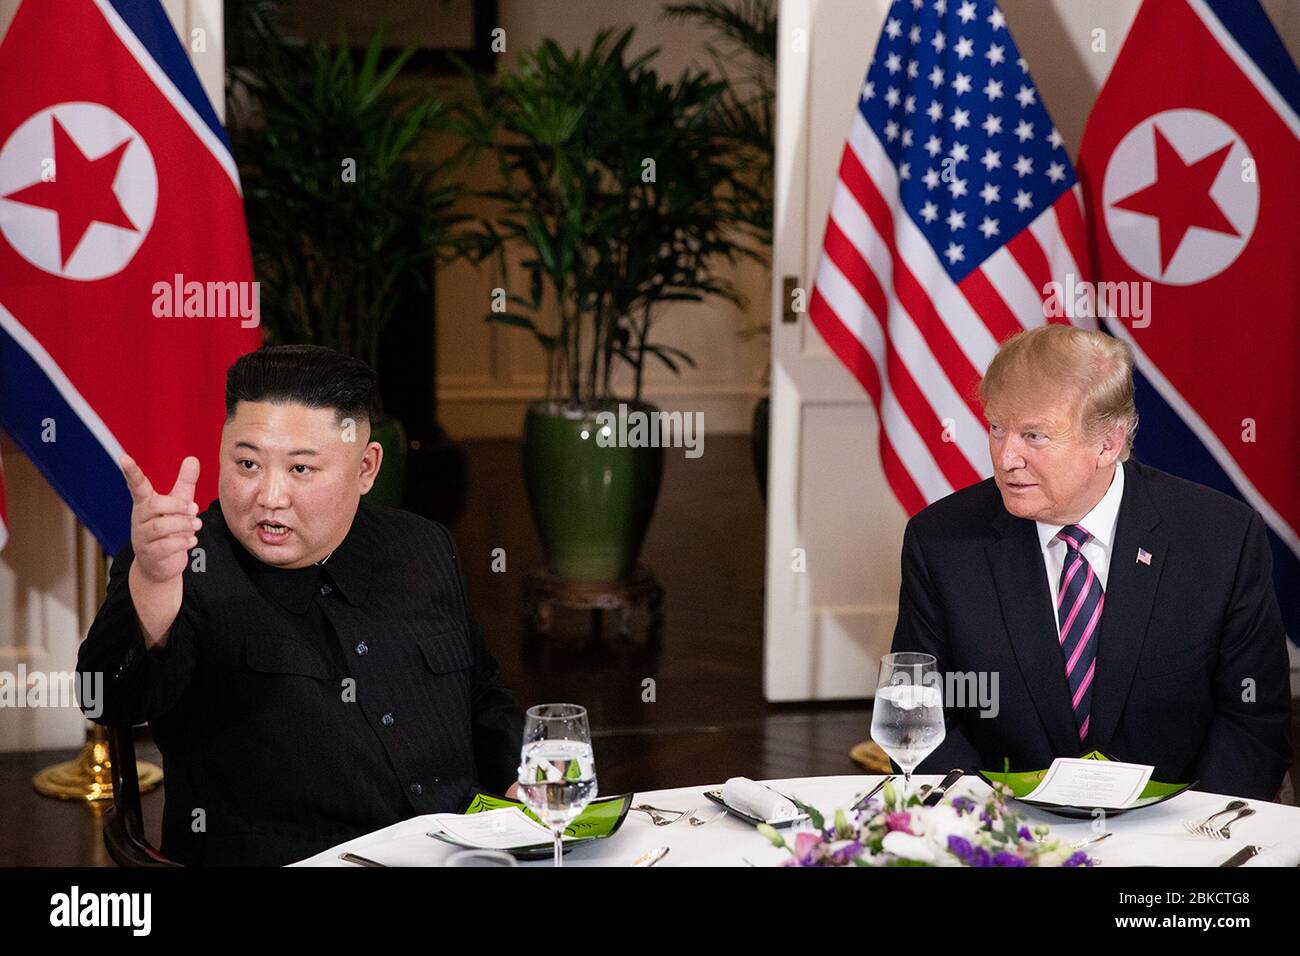 President Donald J. Trump and Kim Jong Un, Chairman of the State Affairs Commission of the Democratic People’s Republic of Korea meet for a social dinner Wednesday, Feb. 27, 2019, at the Sofitel Legend Metropole hotel in Hanoi, for their second summit meeting. President Trump's Trip to Vietnam Stock Photo